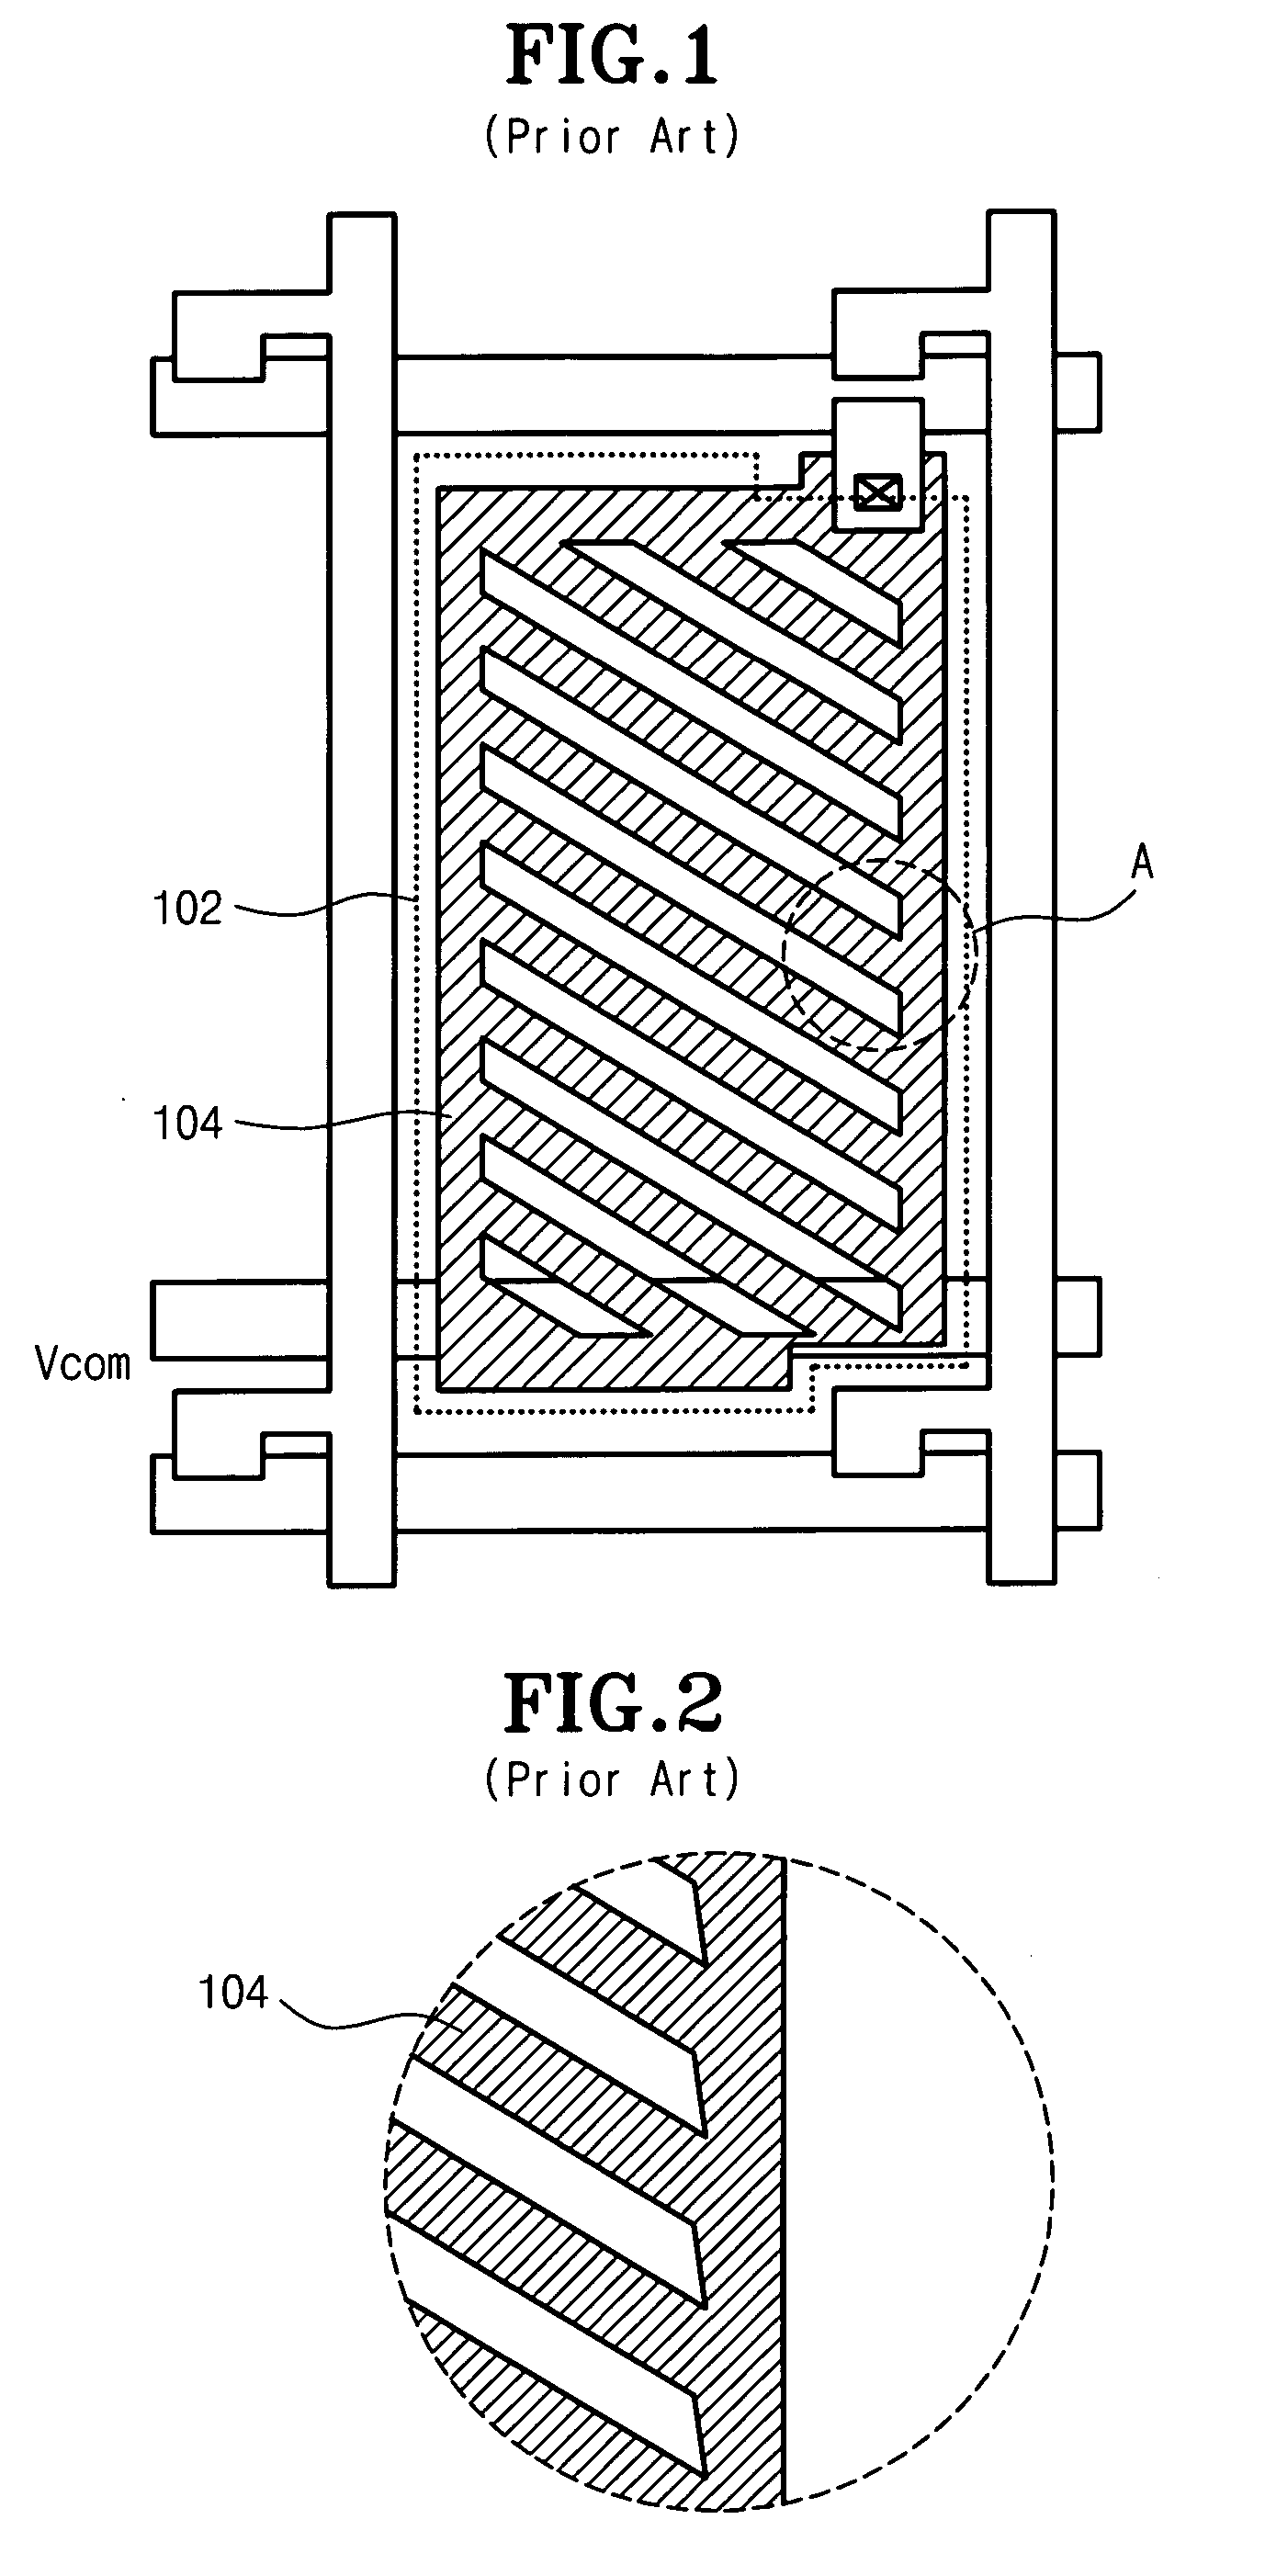 Fringe field switching liquid crystal display having sawtooth edges on the common and pixel electrodes and on the conductive black matrix